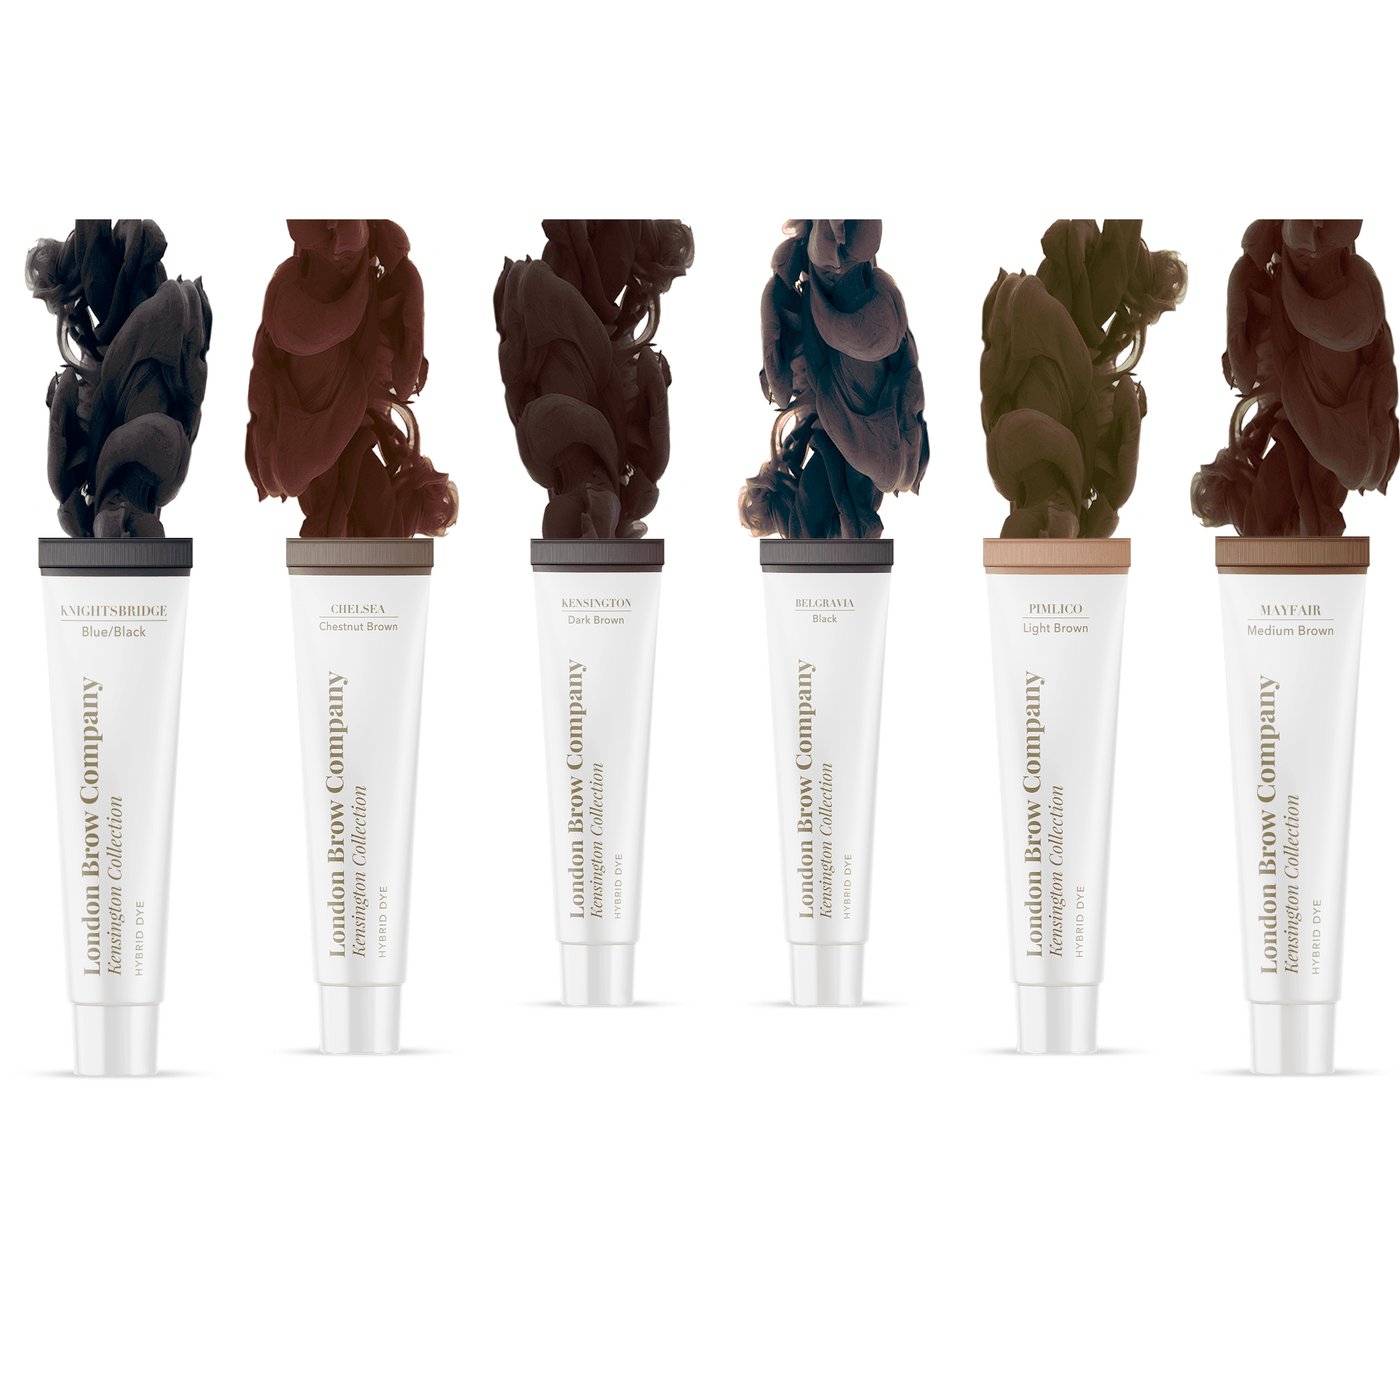 Hybrid Dye Skin Staining Tint - 9 different colour variations - The London Brow Company